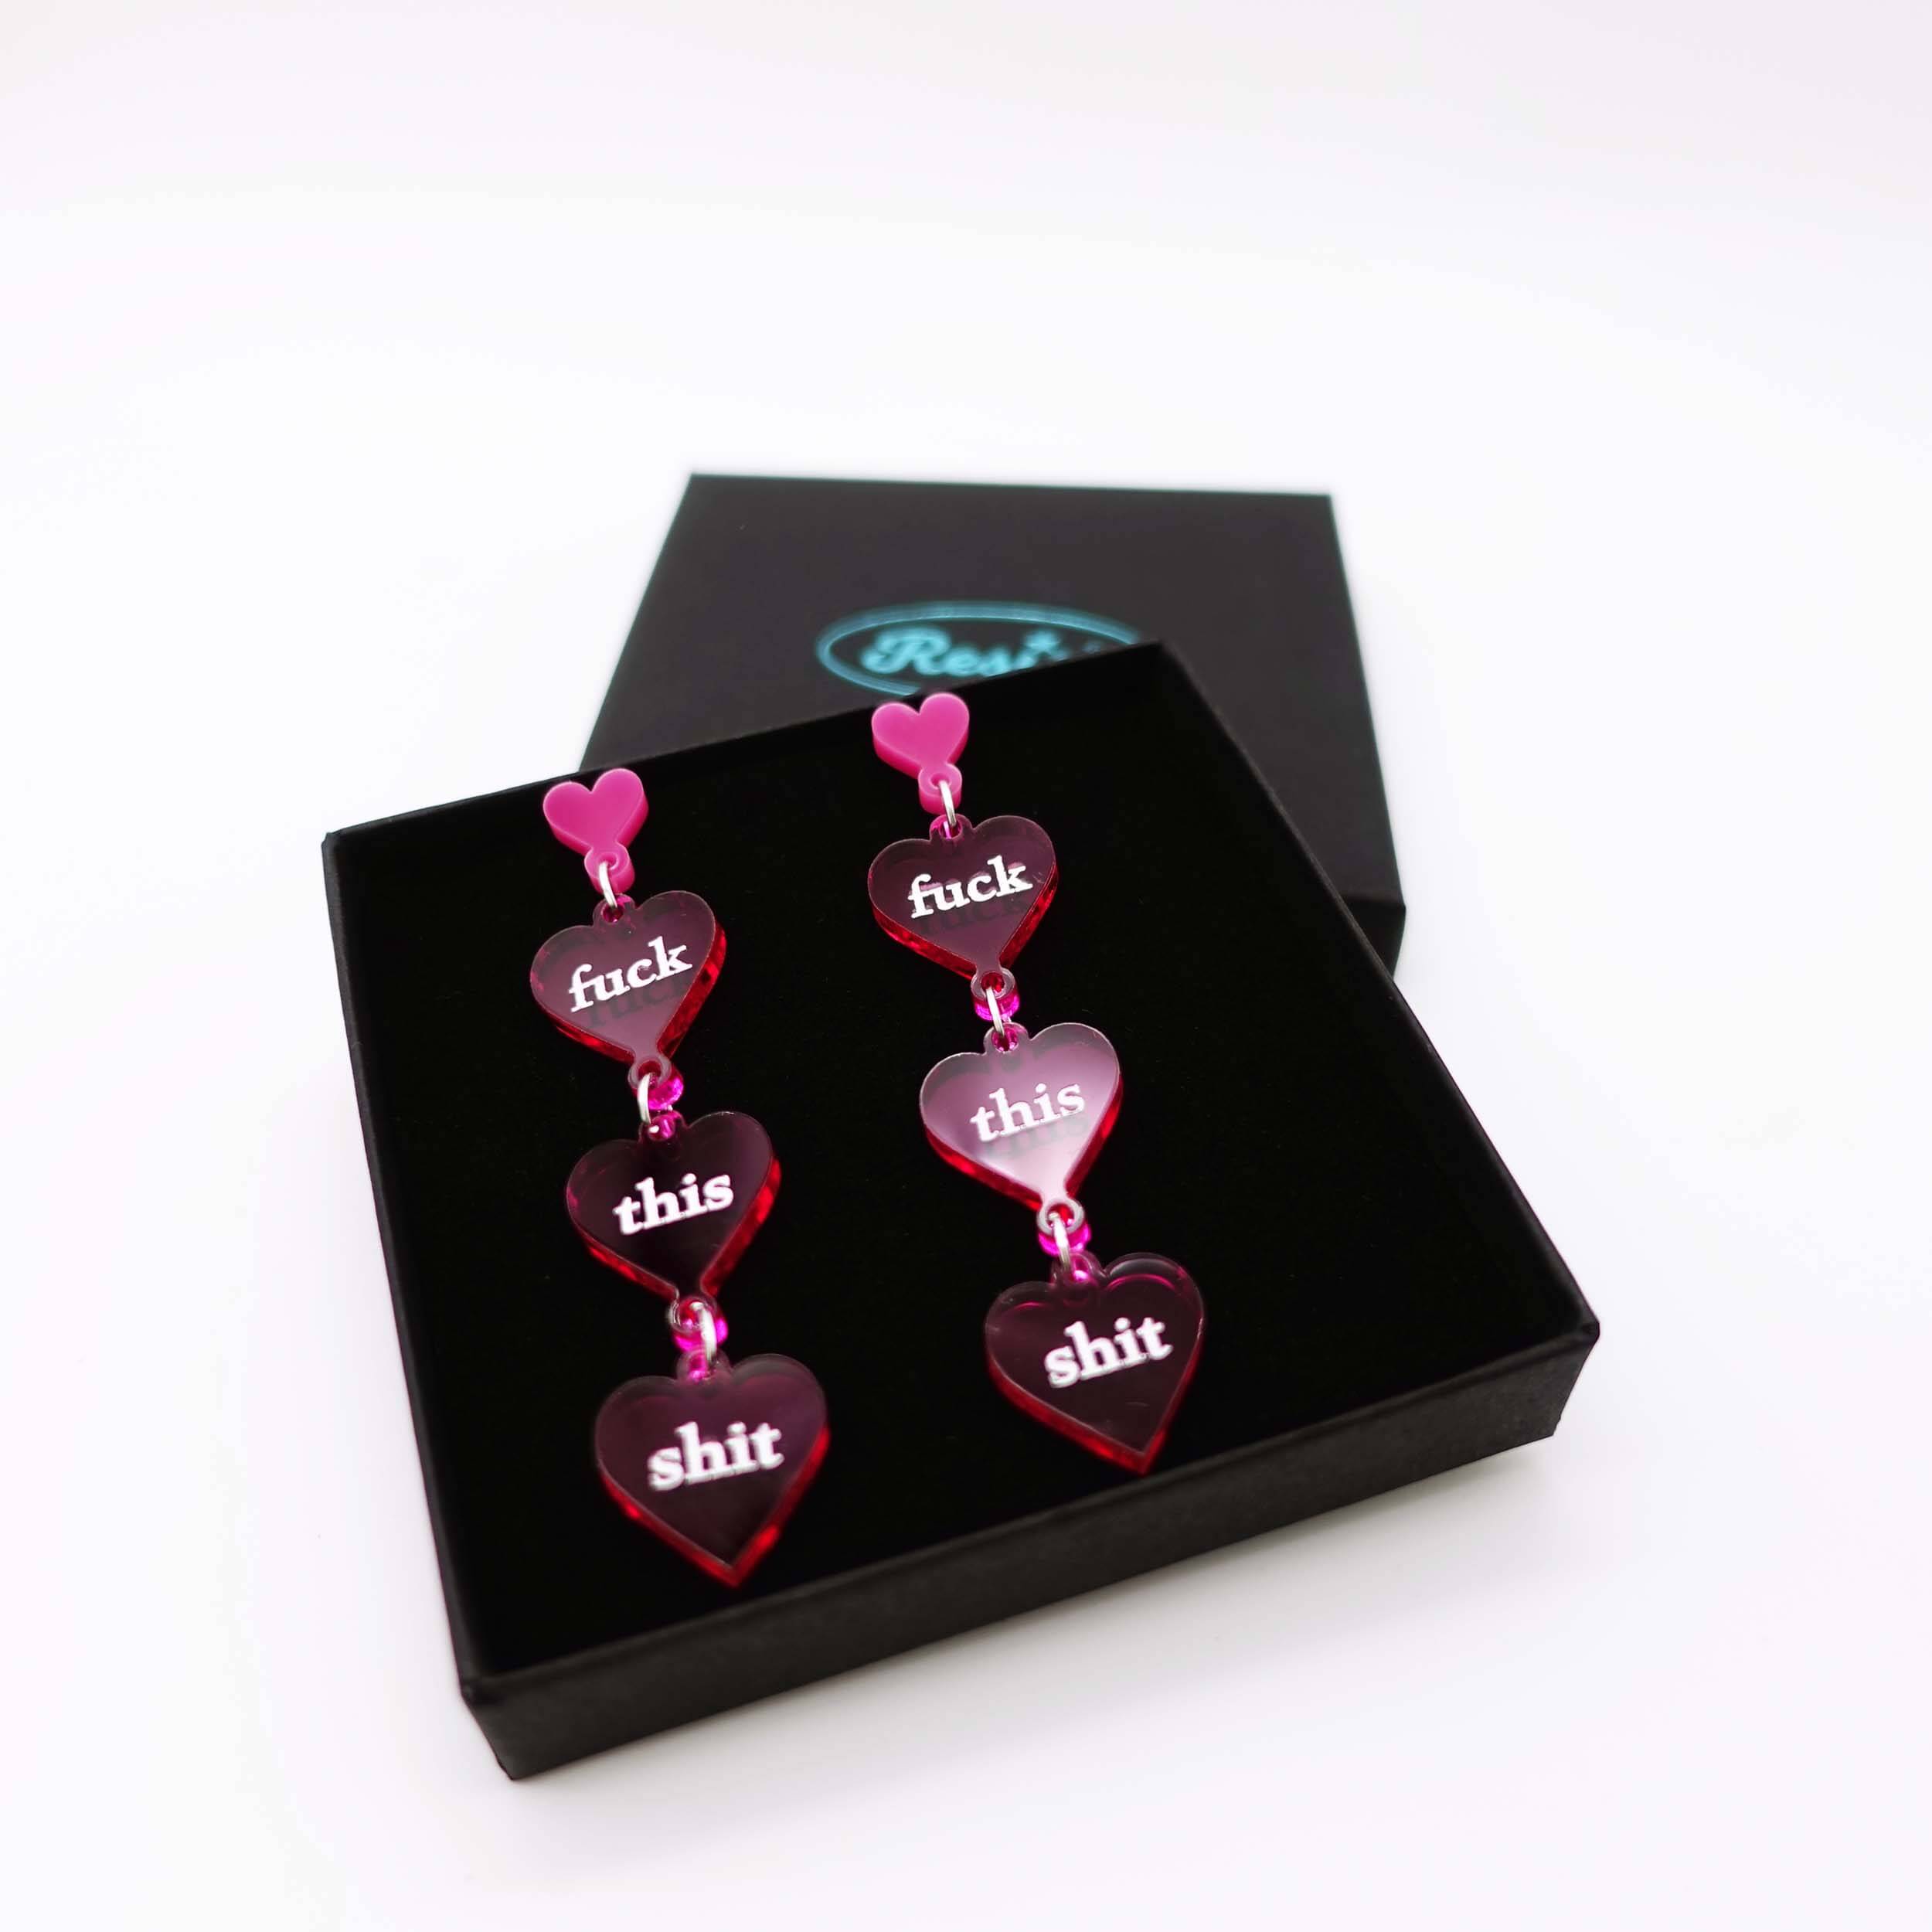 F*ck This Sh*t Valentine's earrings shown in a Wear and Resist gift box. 